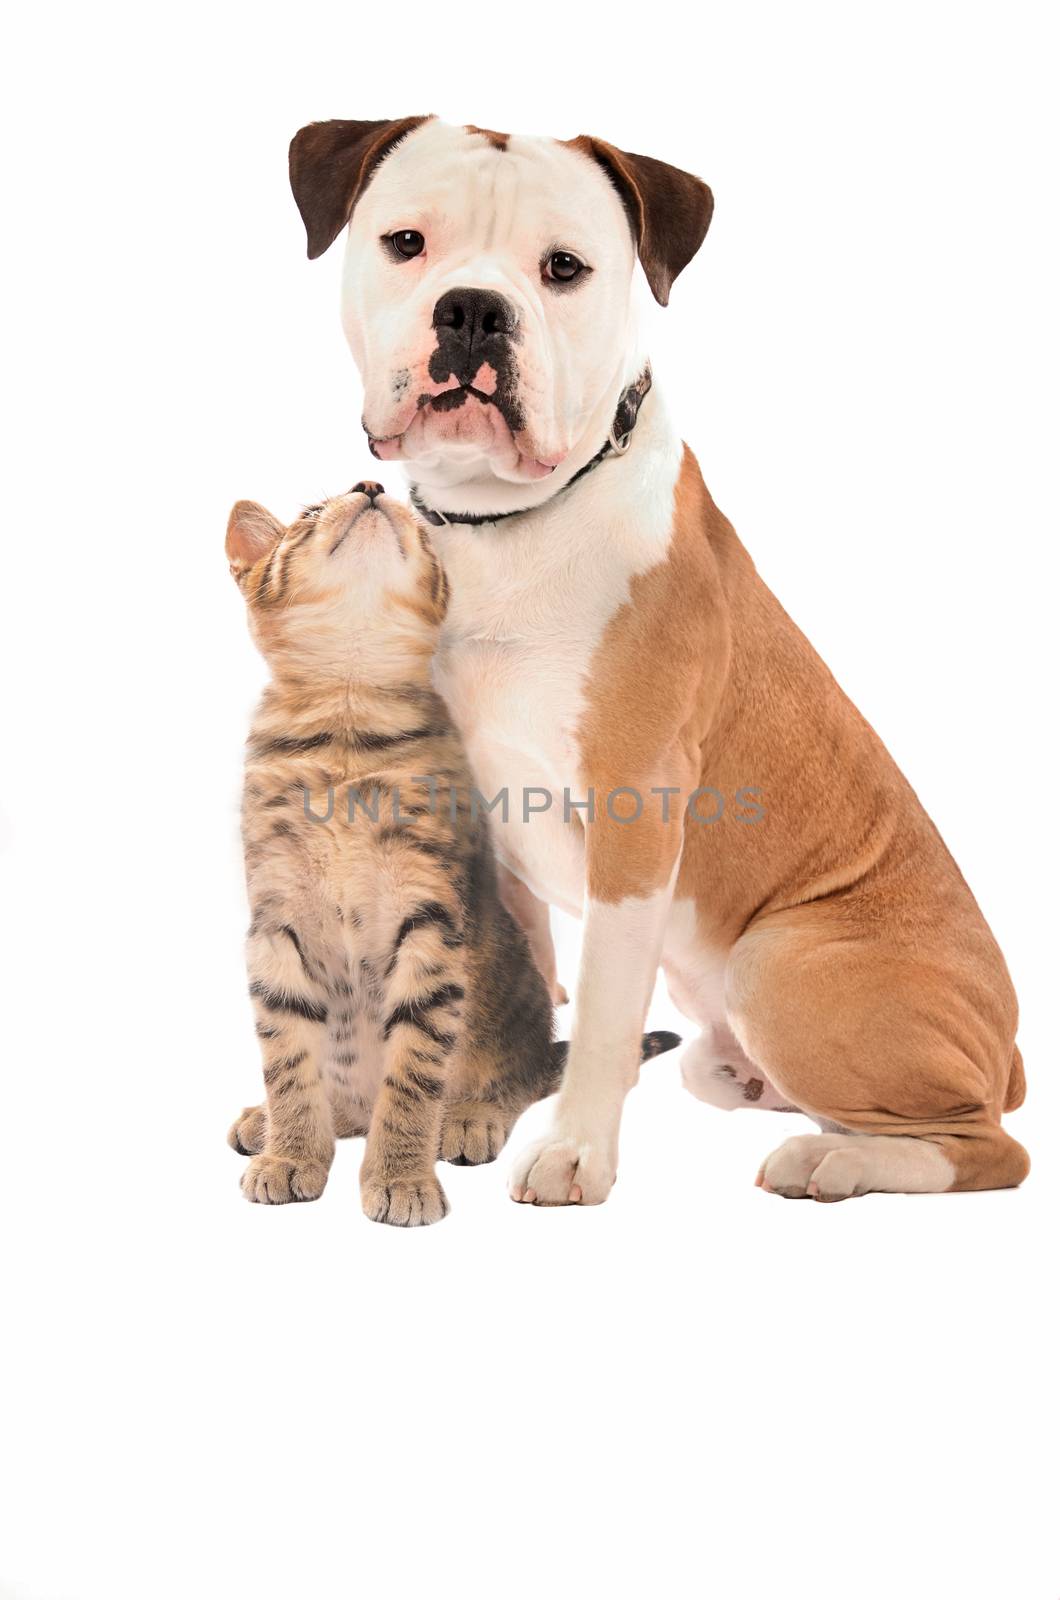 A kitten and dog on white by dnsphotography